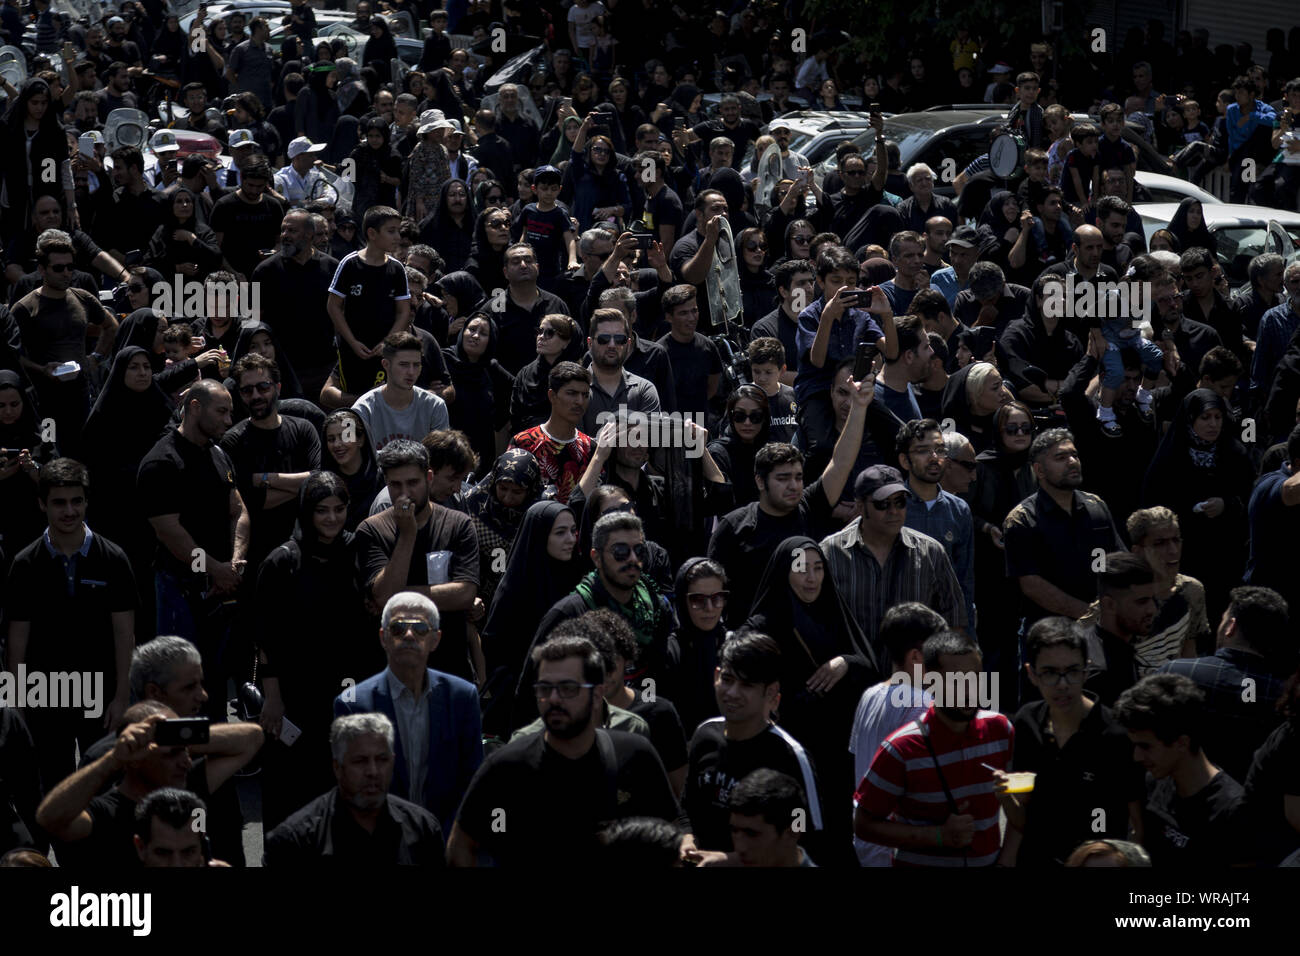 Tehran, Tehran, Iran. 10th Sep, 2019. People attend as Iranians perform at the Ashura ceremonies in Tehran, Iran. The Ashura day commemorates the death anniversary of the third Shiite Imam Hussein, who was the grandson of Muslim Prophet Muhammed. Ashura is the peak of ten days of mourning when Shiite Muslims mourn the killing of Imam Hussein whose shrine is in Karbala in southern Iraq. Credit: Rouzbeh Fouladi/ZUMA Wire/Alamy Live News Stock Photo